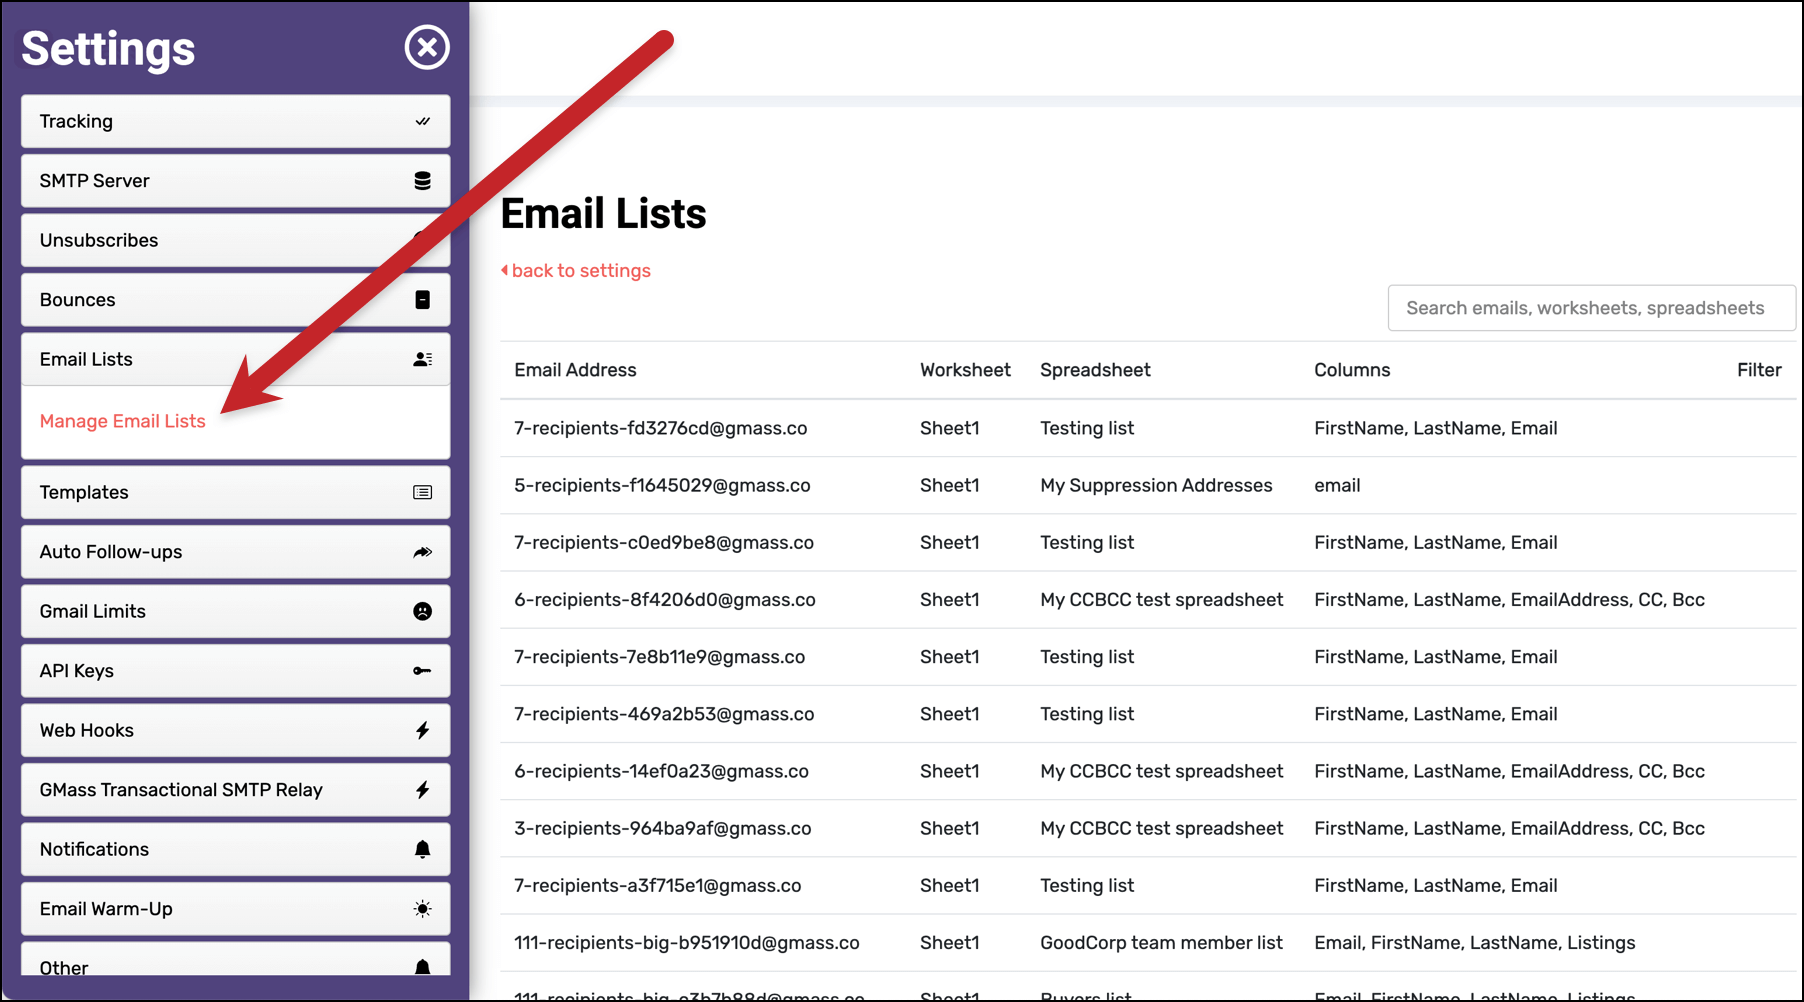 Manage email lists in the GMass dashboard